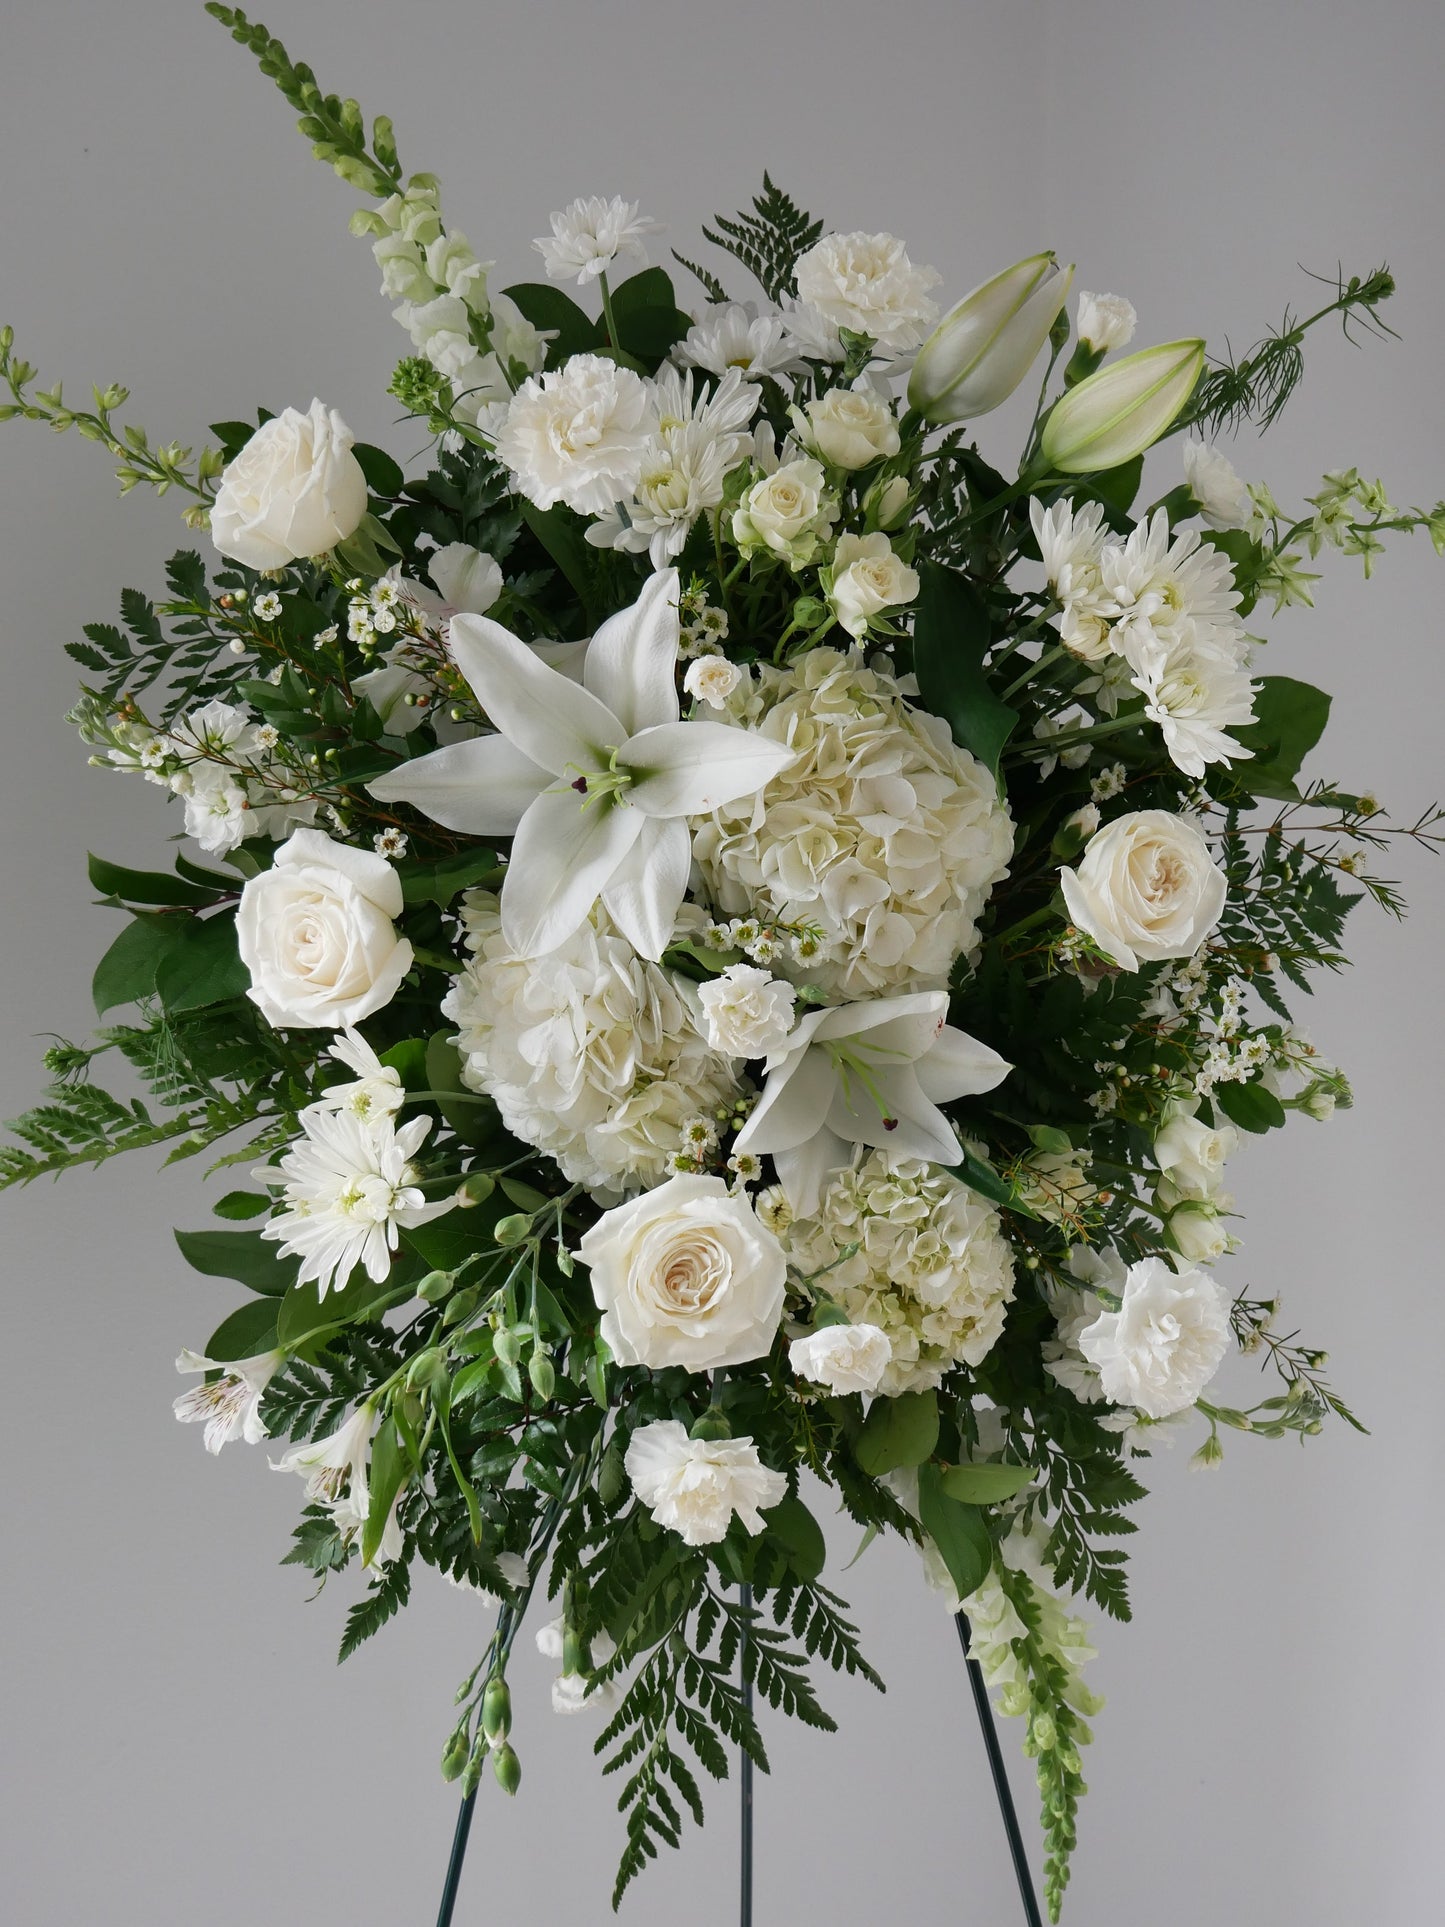 White funeral spray featuring lily, roses, spray roses, chrysanthemum, carnations, snap dragon and greens